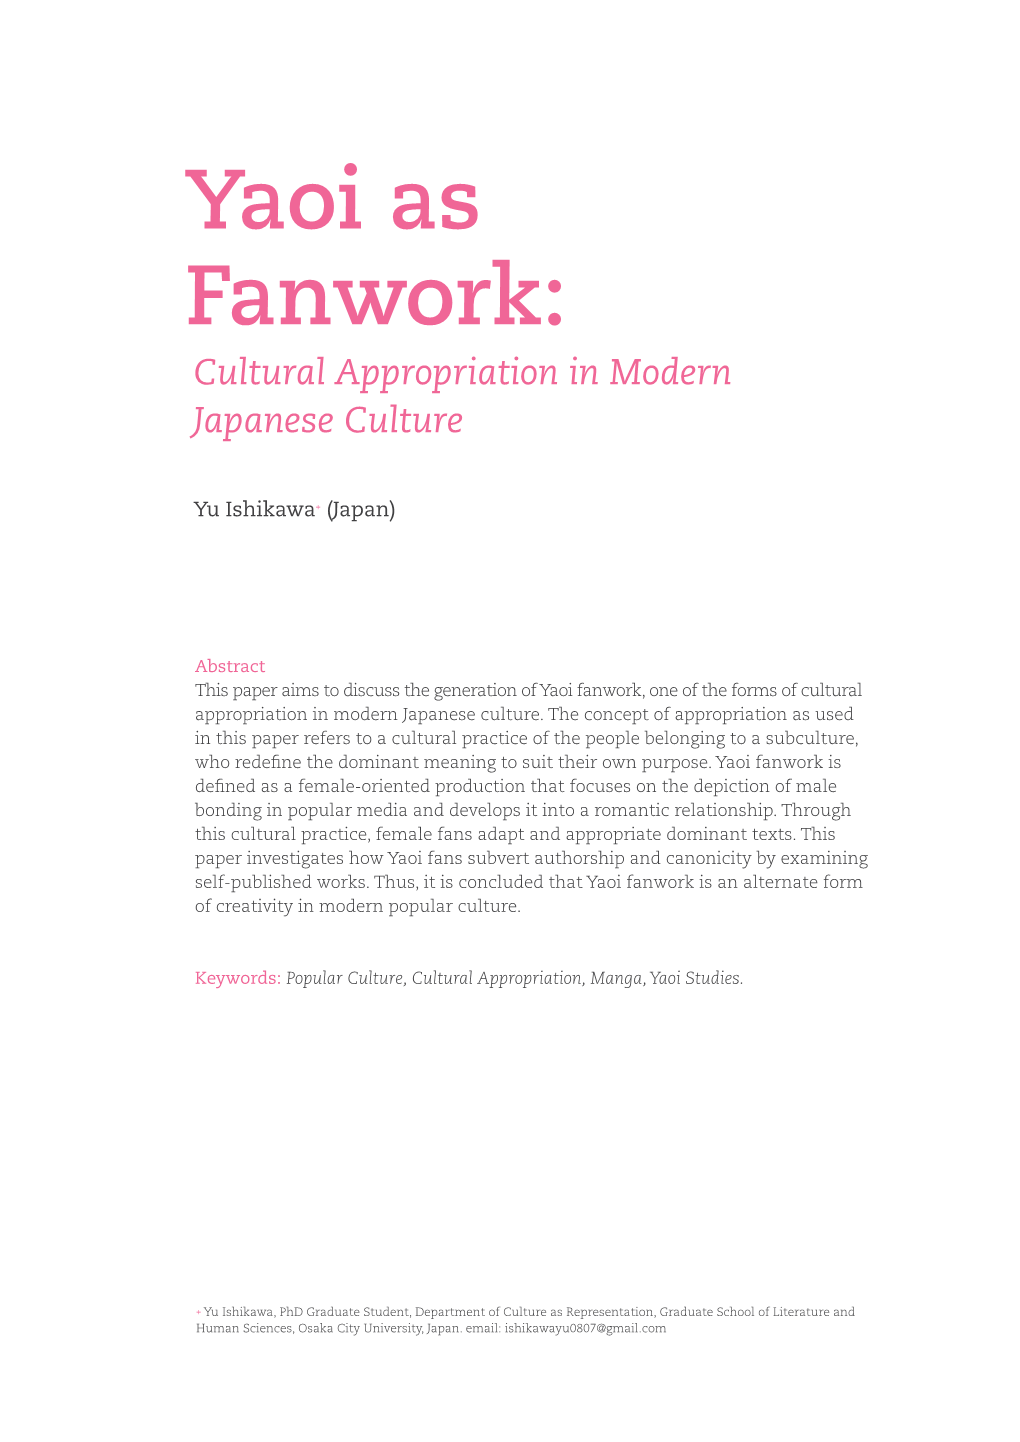 Cultural Appropriation in Modern Japanese Culture